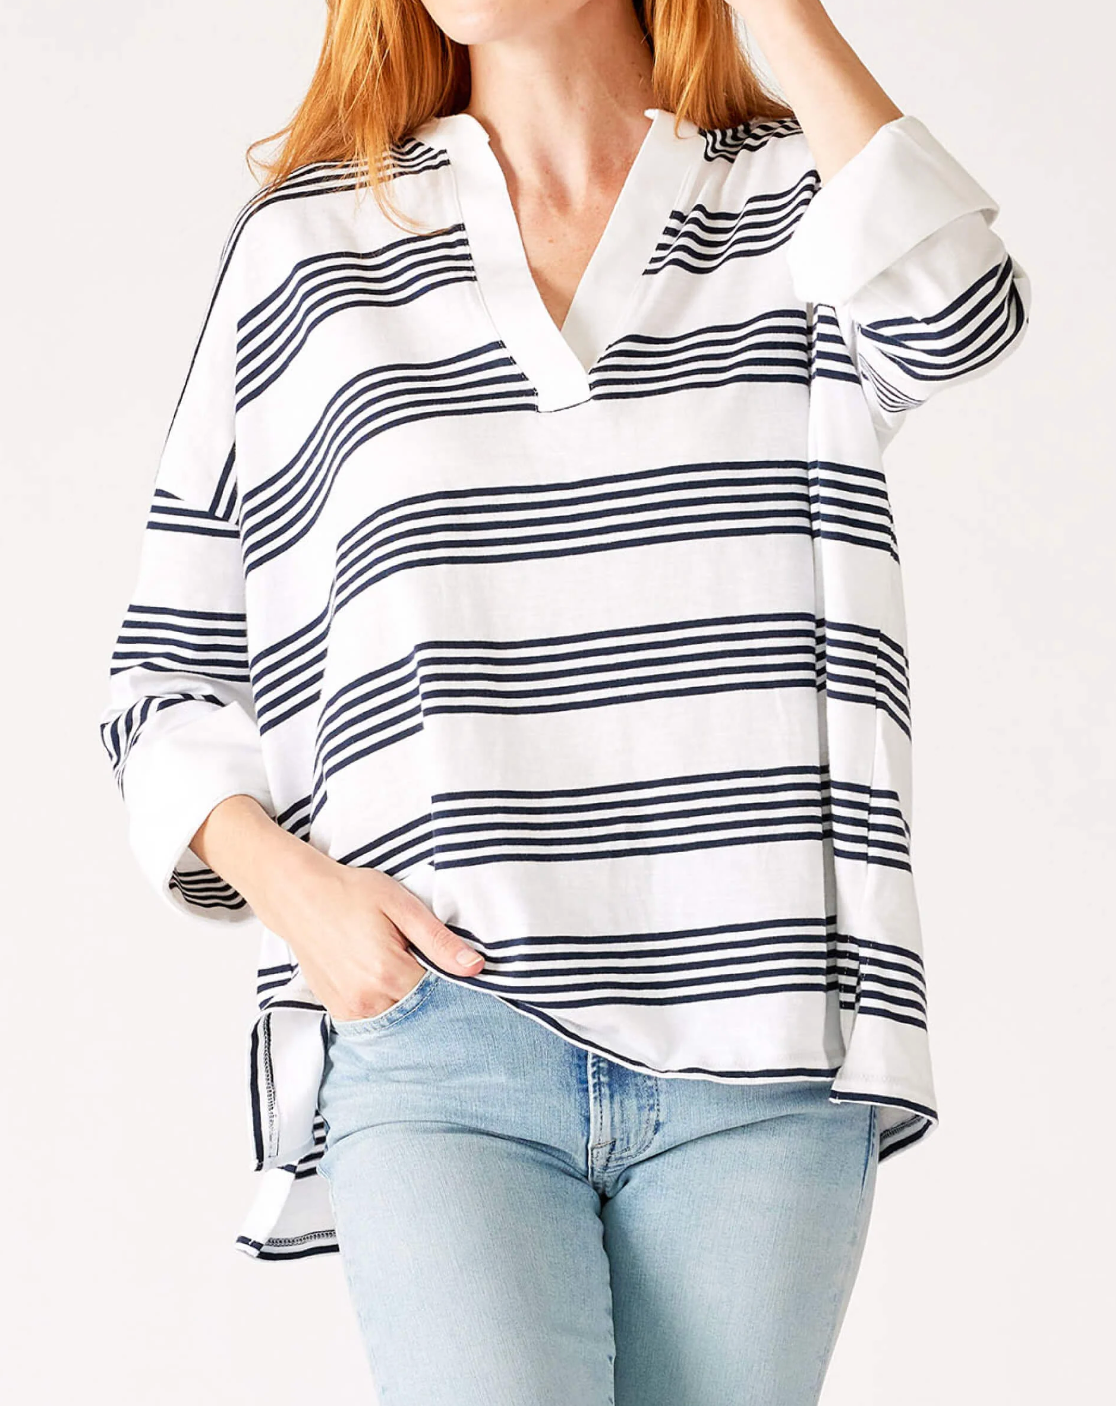 Striped Amelia Cuff Tee - The French Shoppe